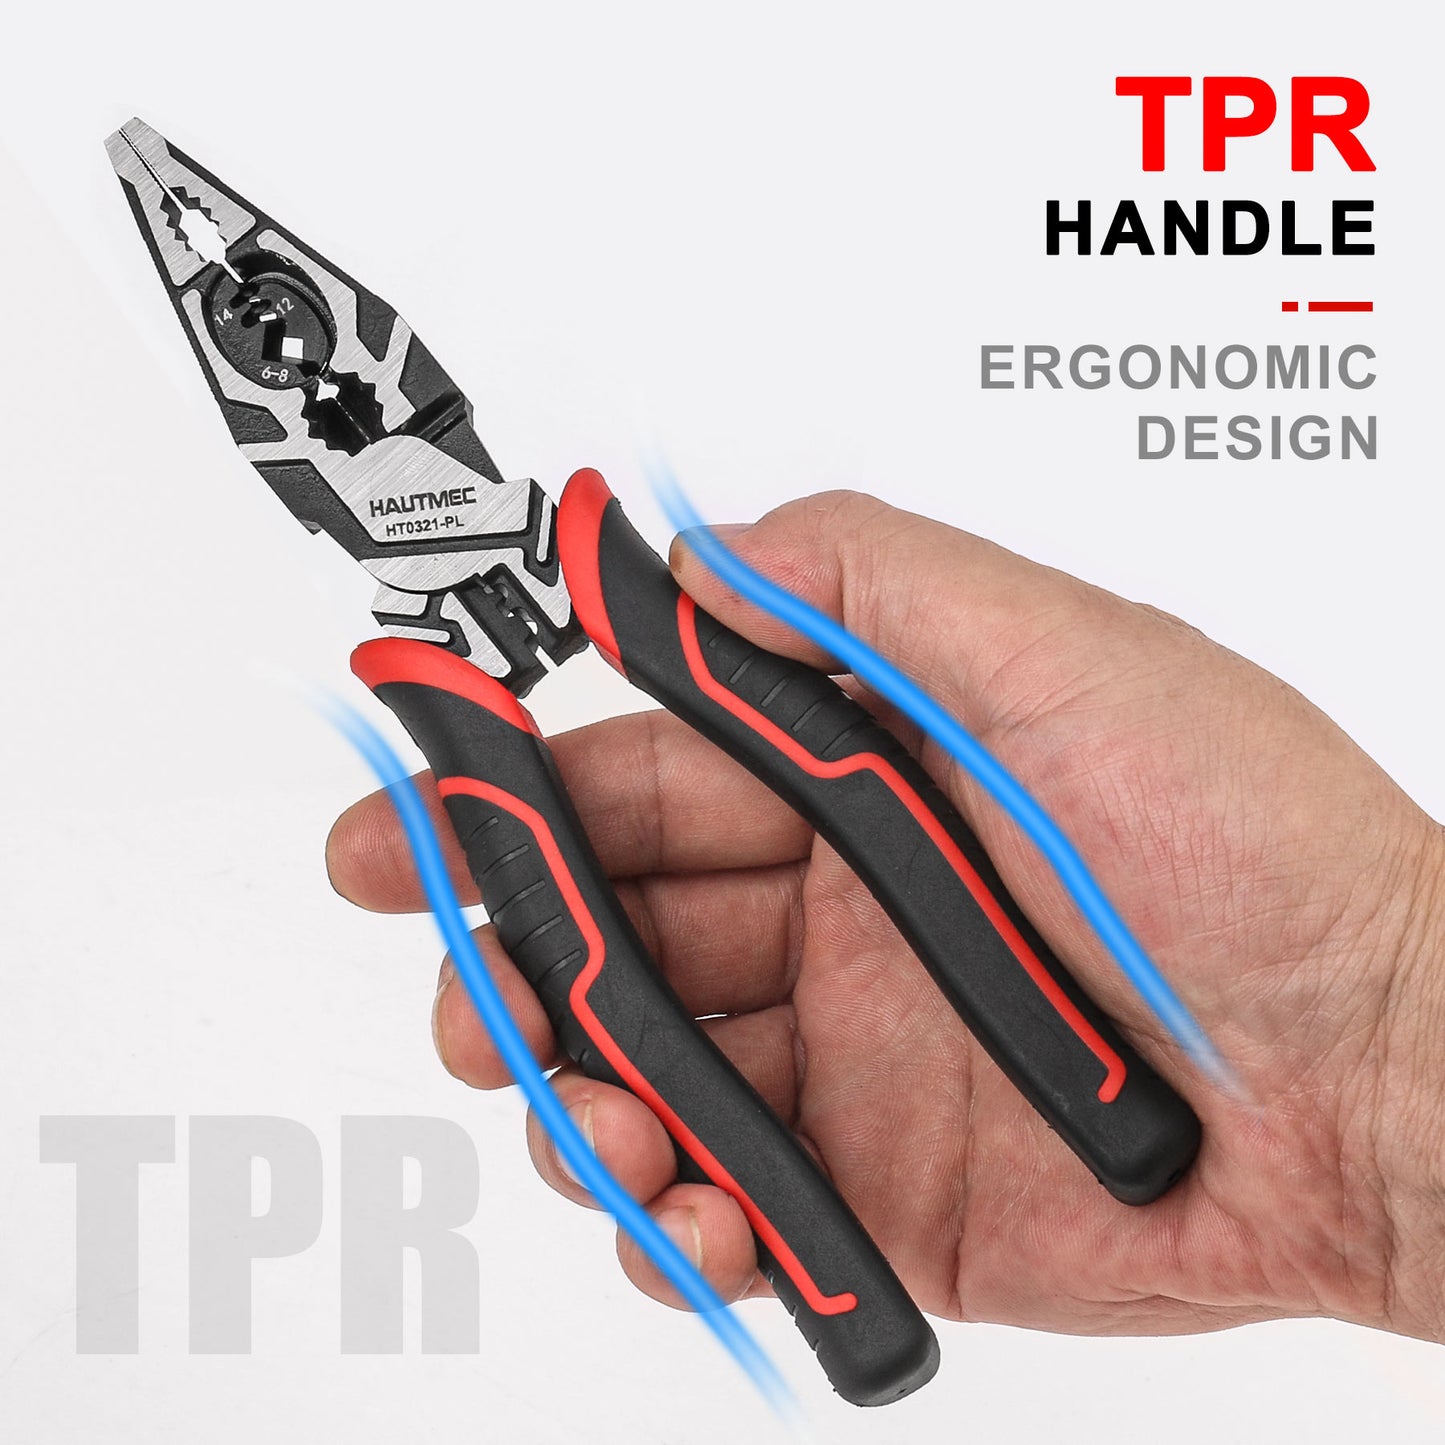 HAUTMEC Pro 8" Multifunctional Combination Linesman Plier with Cable Cutter, Wire Stripper, Terminal Crimping, Tool Clamping and Spanner, High leverage of Eccentric Design HT0321